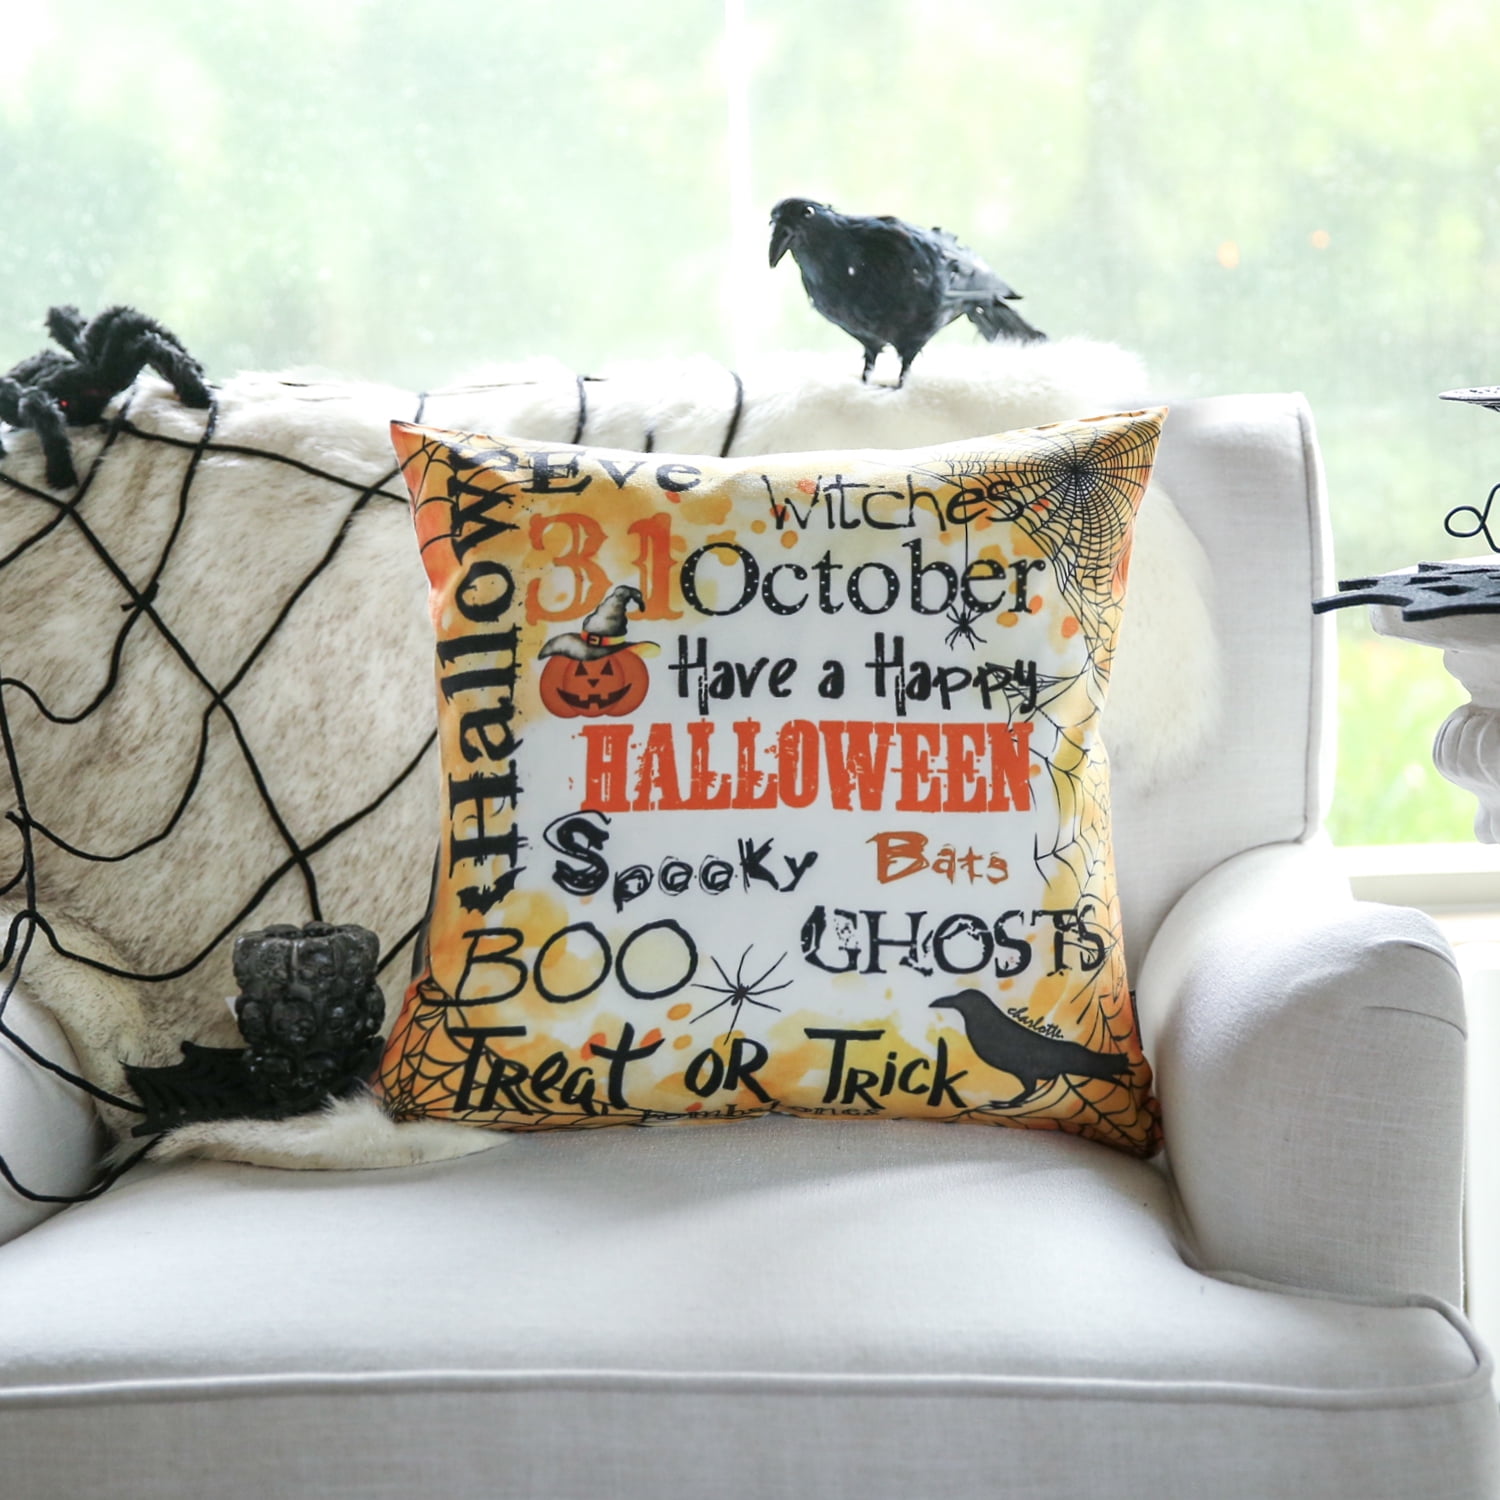 Phantoscope Halloween Holiday Collection Embroidery Decorative